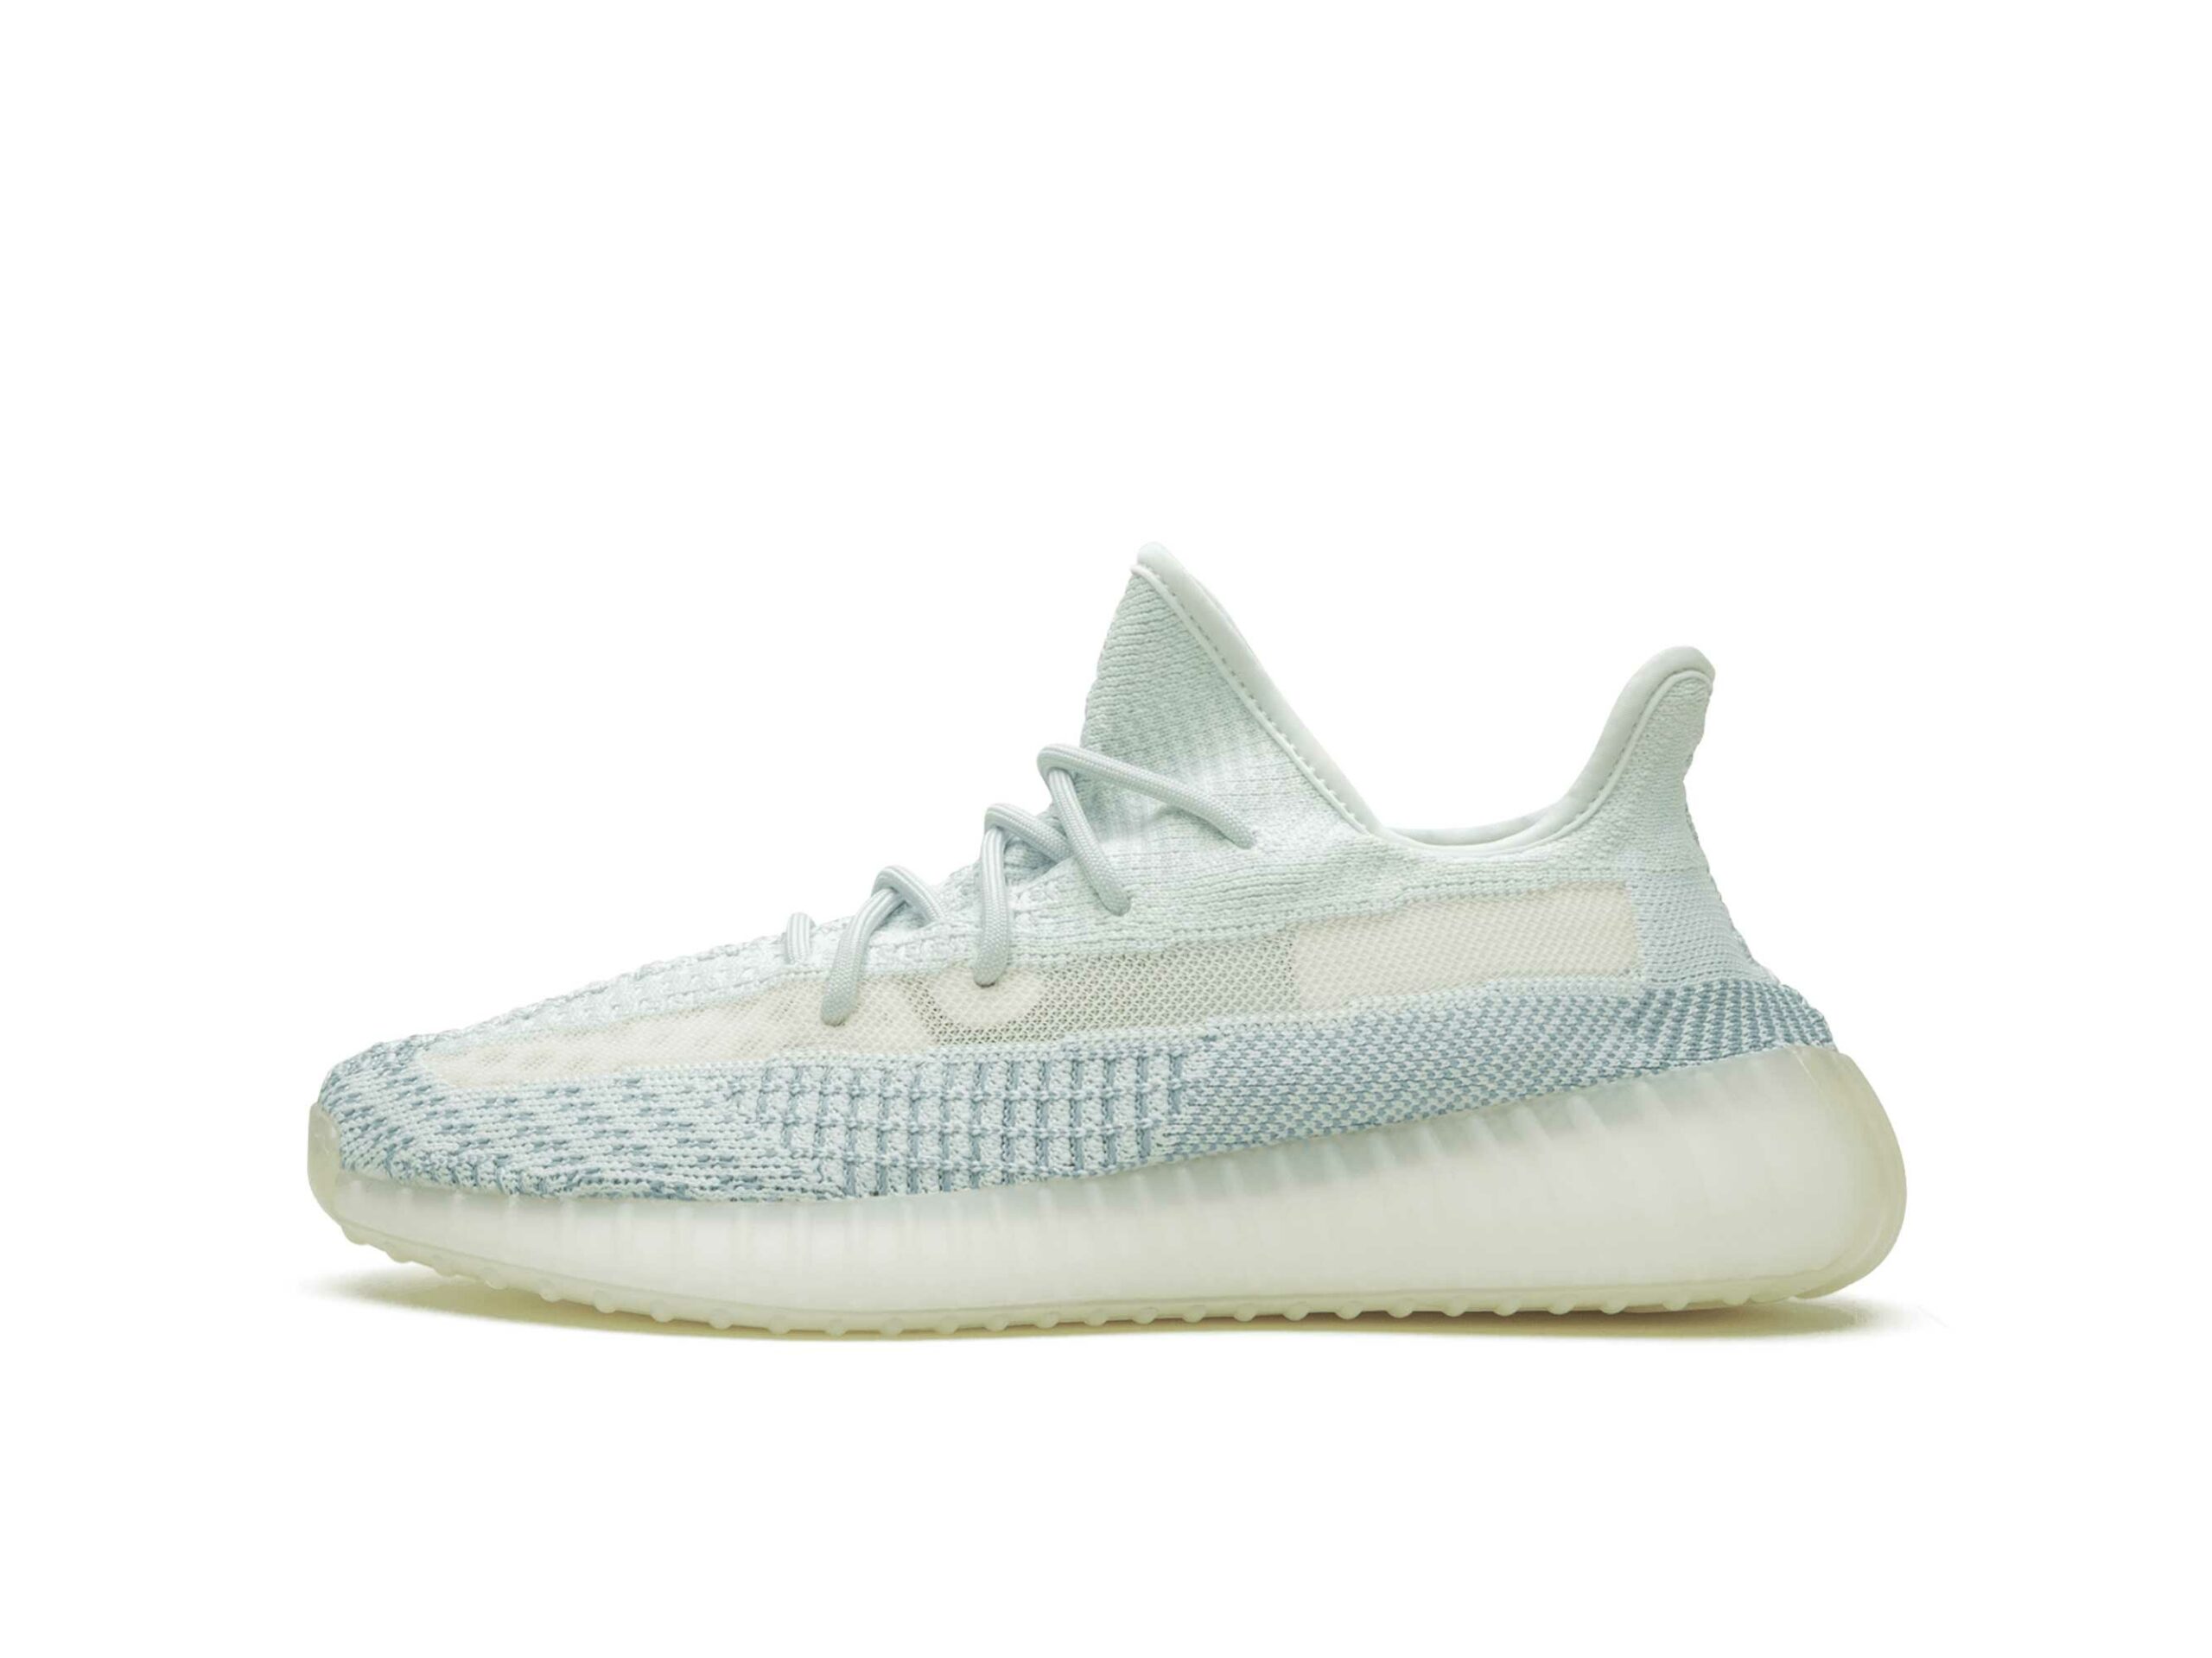 adidas yeezy boost 350v2 cloud white